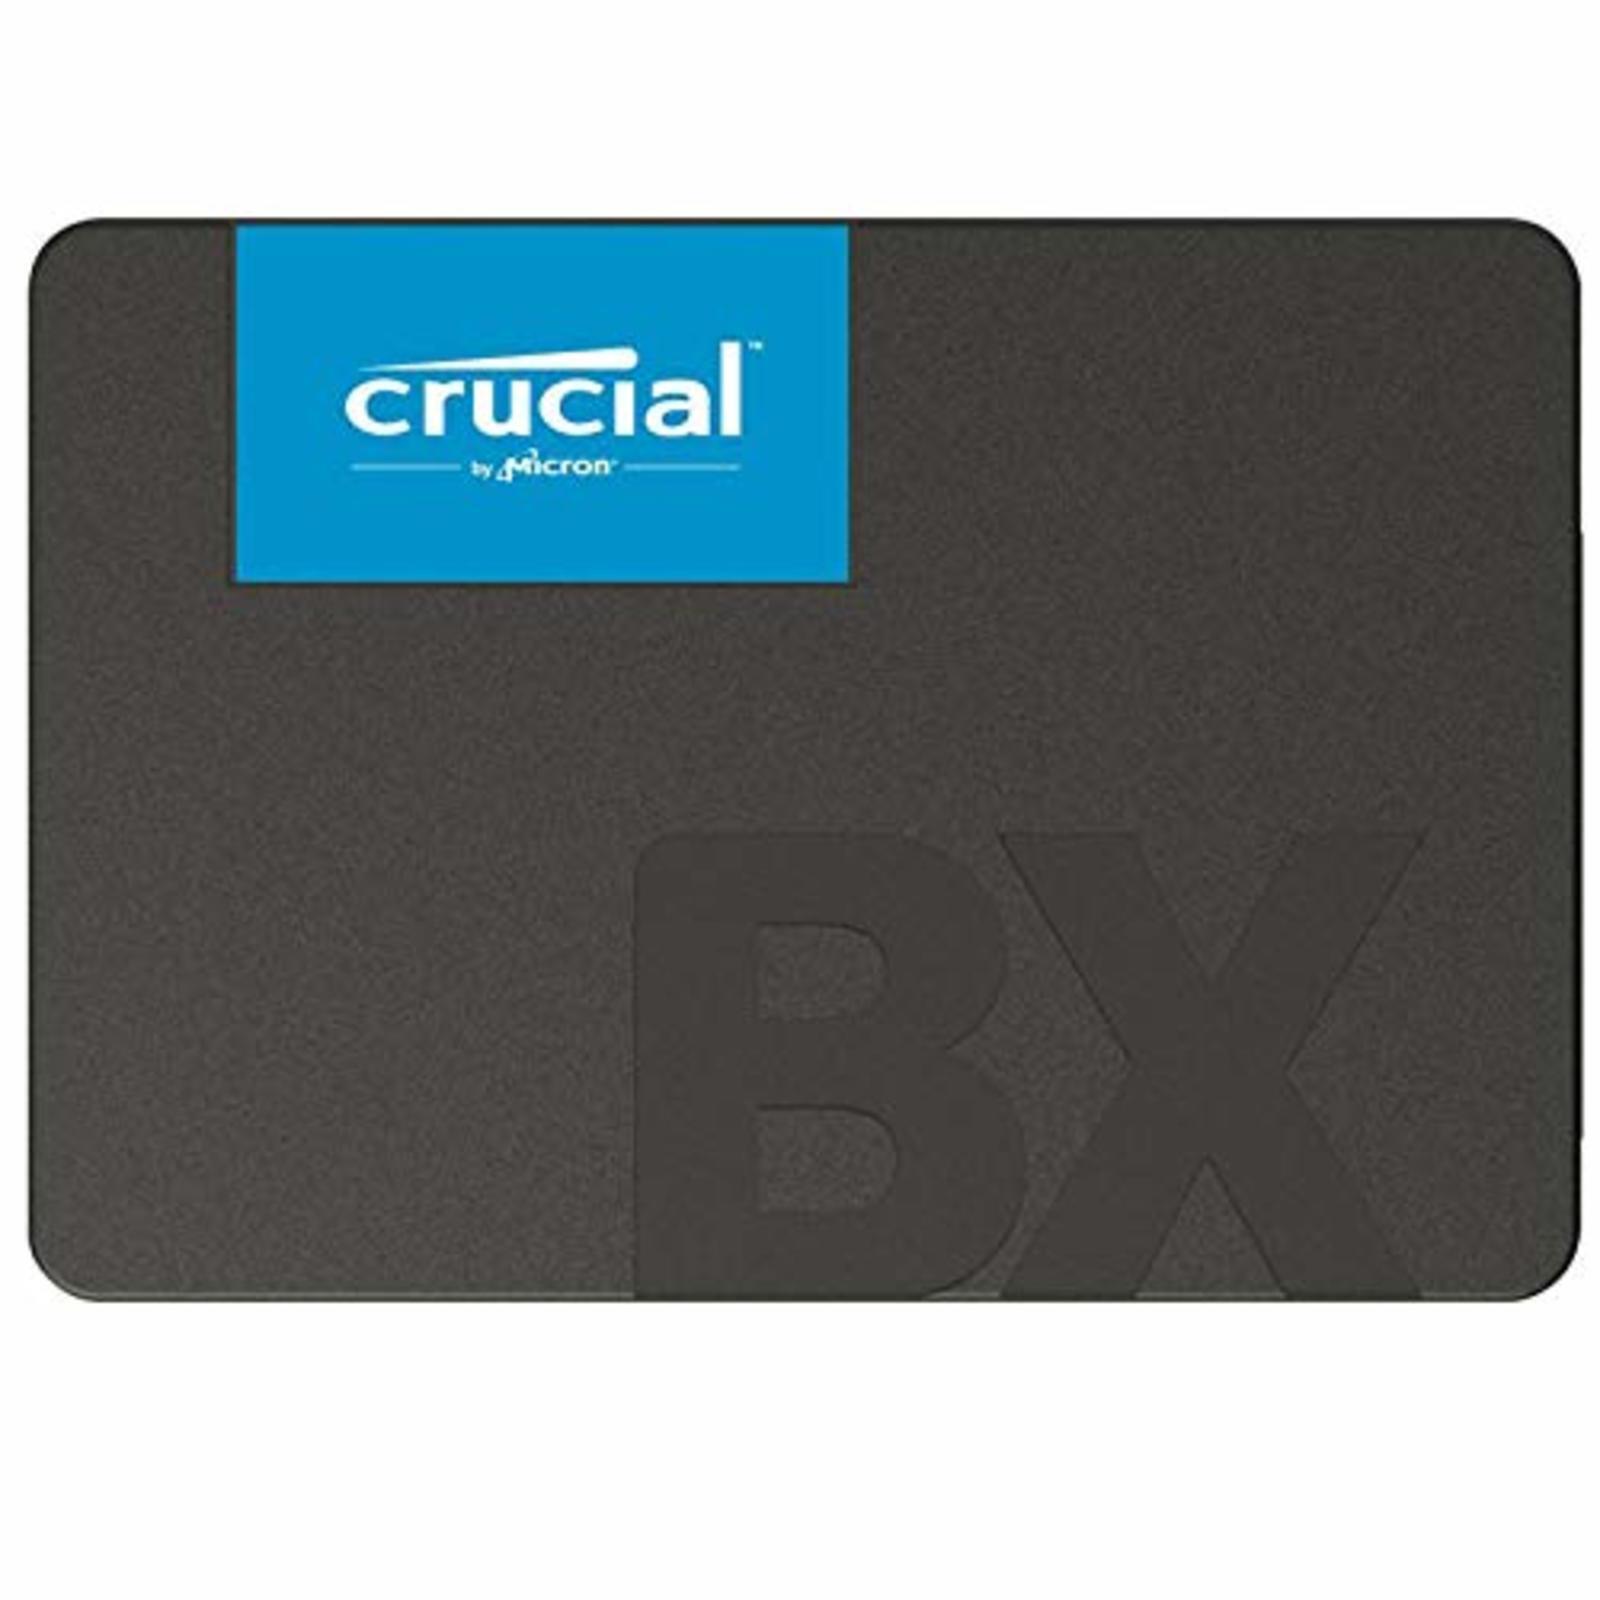 Crucial SSD 240GB BX500 SATA3 built-in 2.5 inches 7mm CT240BX500SSD1 F/S wTrack#